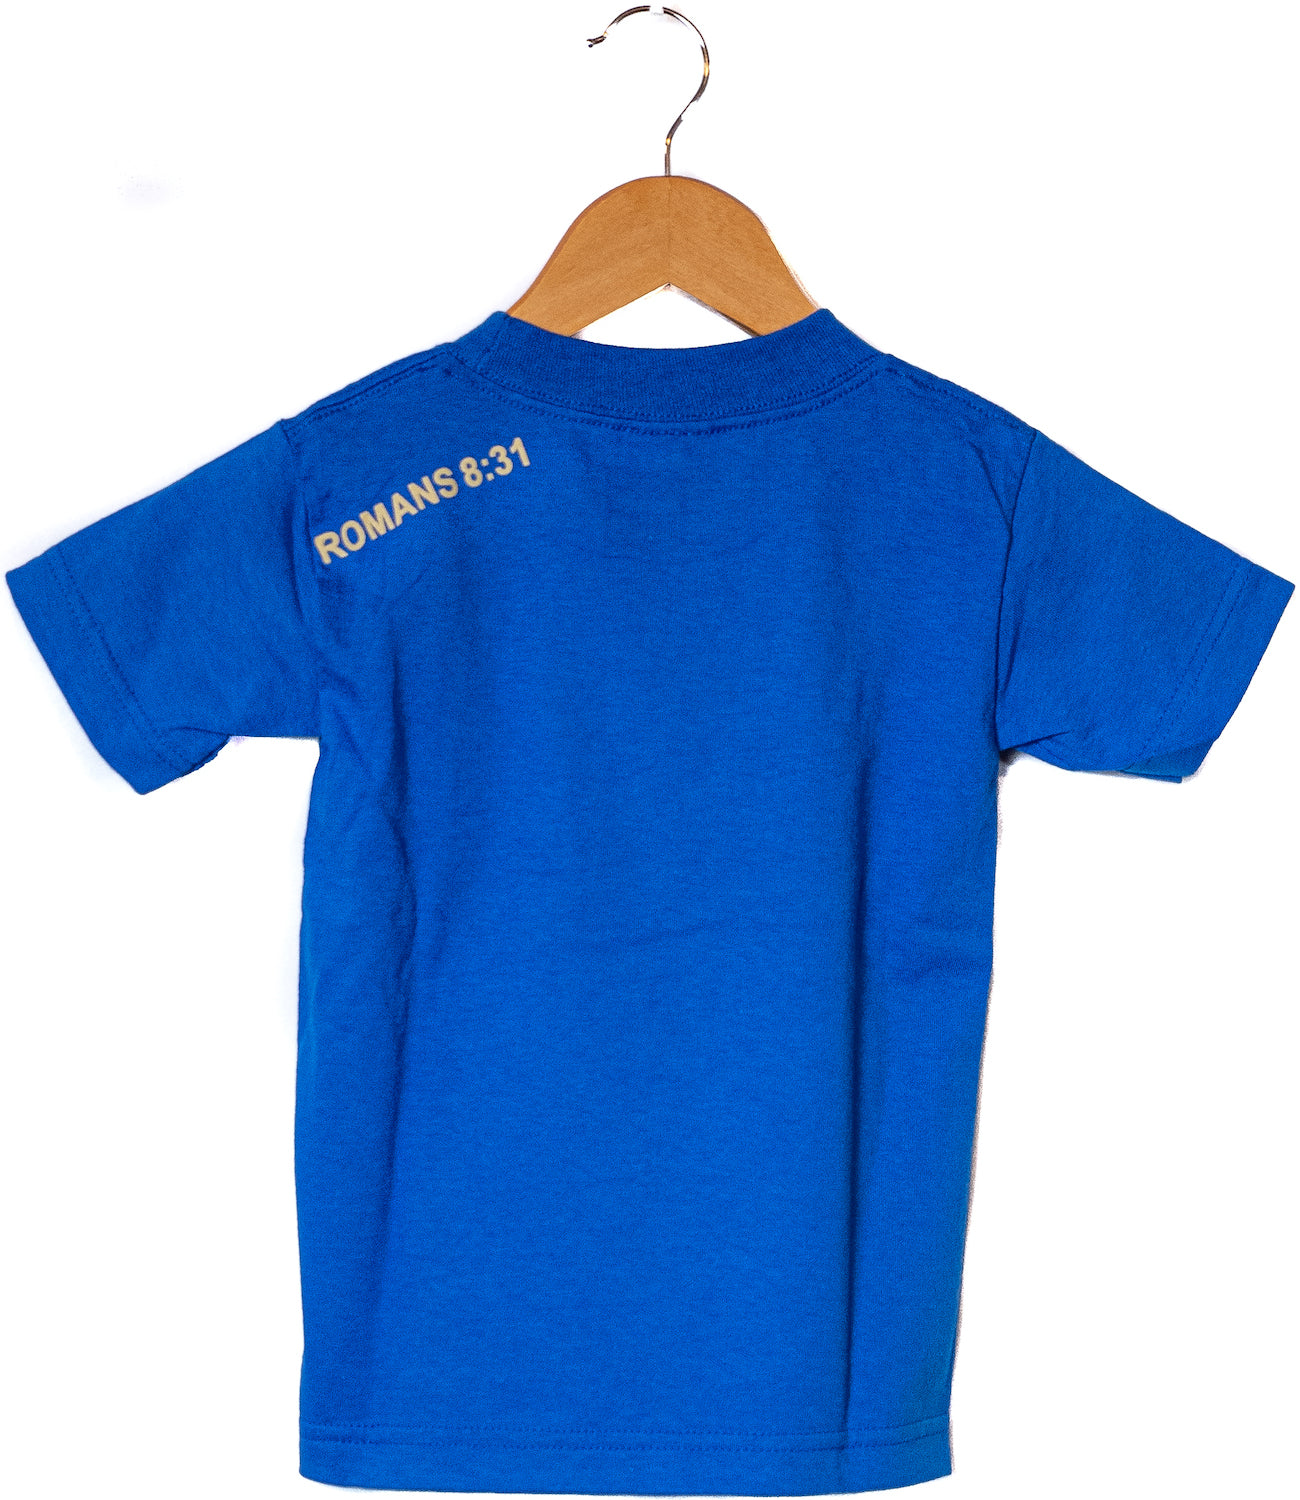 "Be Bold" design, Blue tee, youth/toddler back